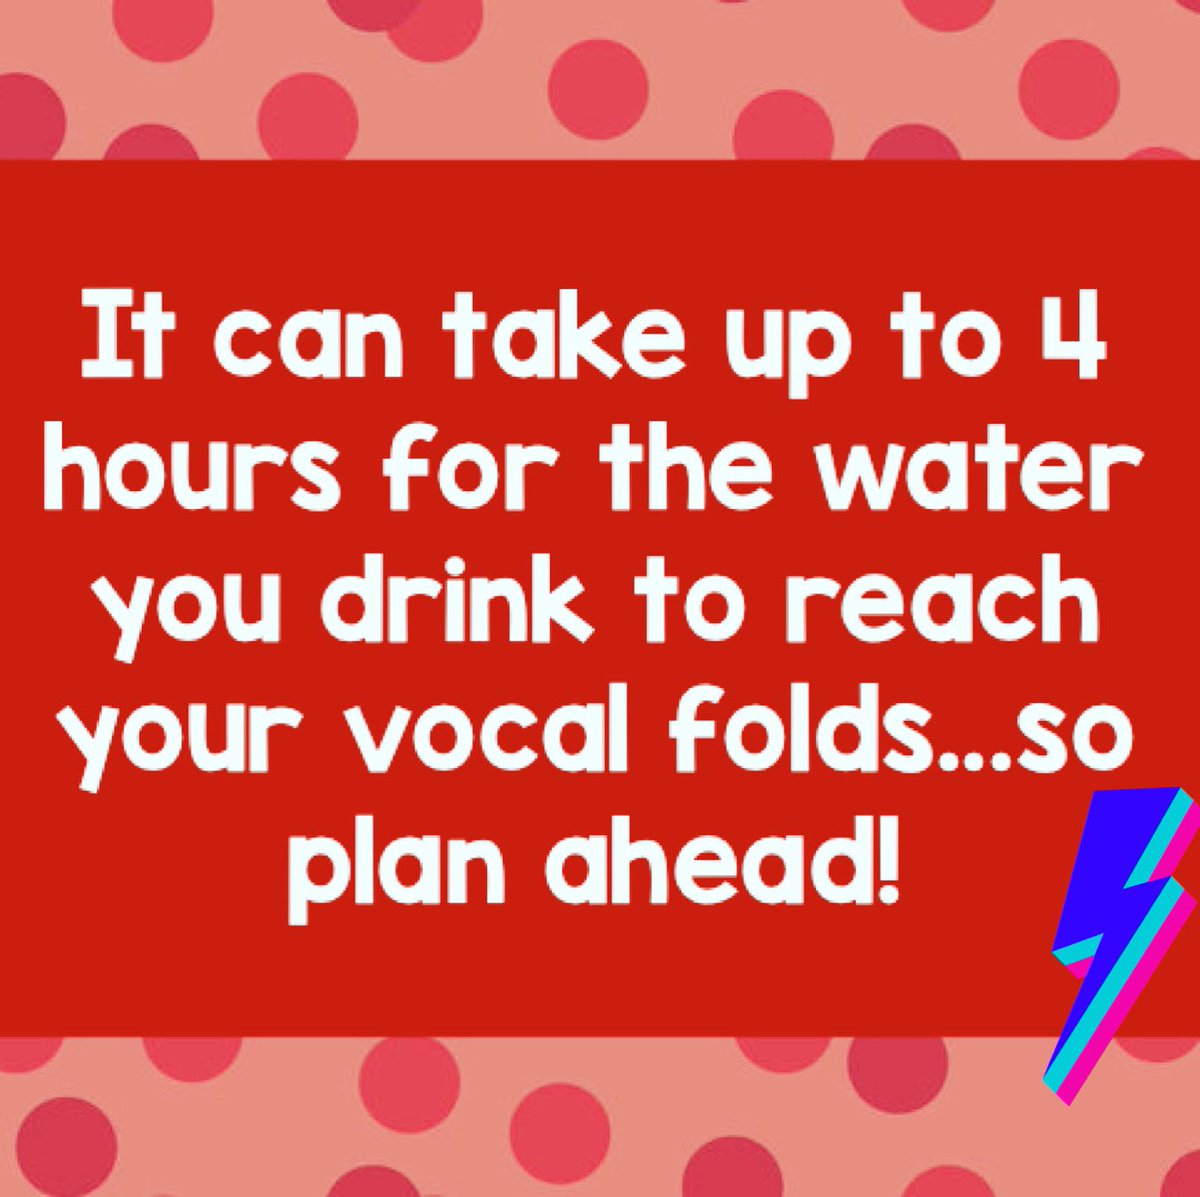 What you drink in the moment does nothing to truly hydrate your vocal folds. You need to drink water hours before you present, teach, or perform! #voicecare #voicehygiene #voiceproblems #voicestrain #teacherproblems #musicteacher